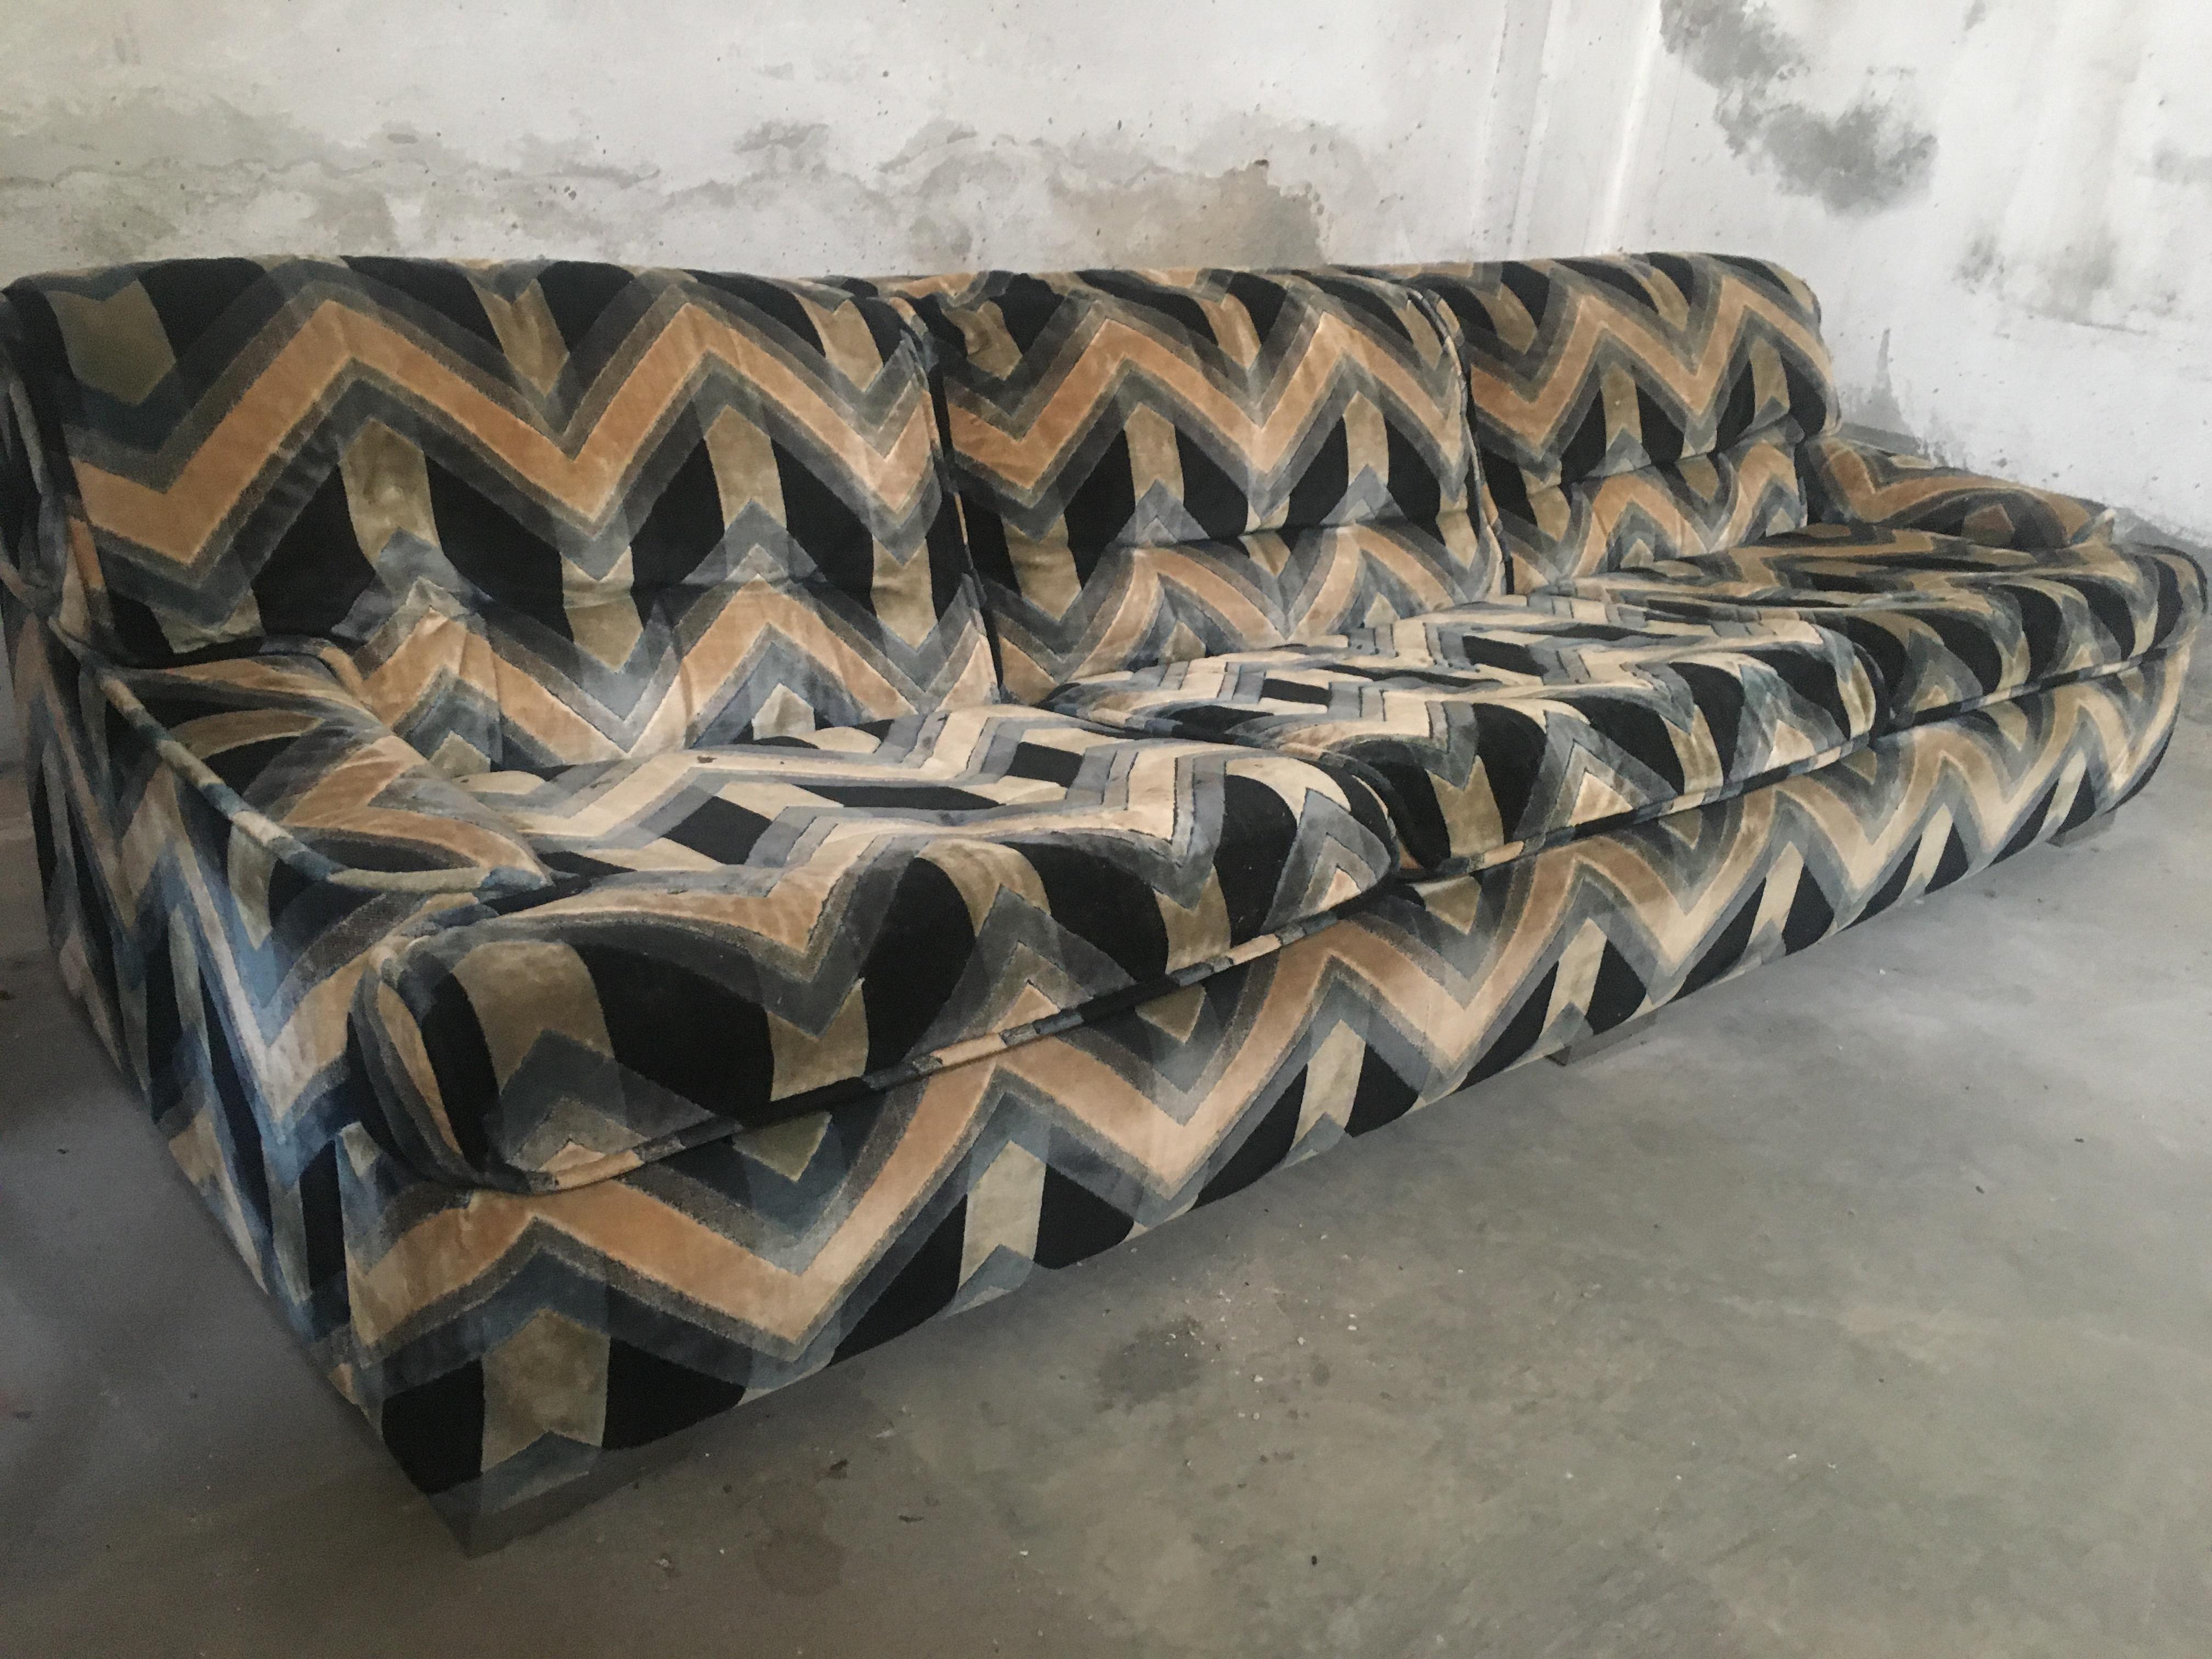 Mid-Century Modern French three-seat sofa with original velvet fabric by Gérard Guermonprez, 1970s
The Sofa could be sold as a set together with its armchair (see picture attached). Price on demand.